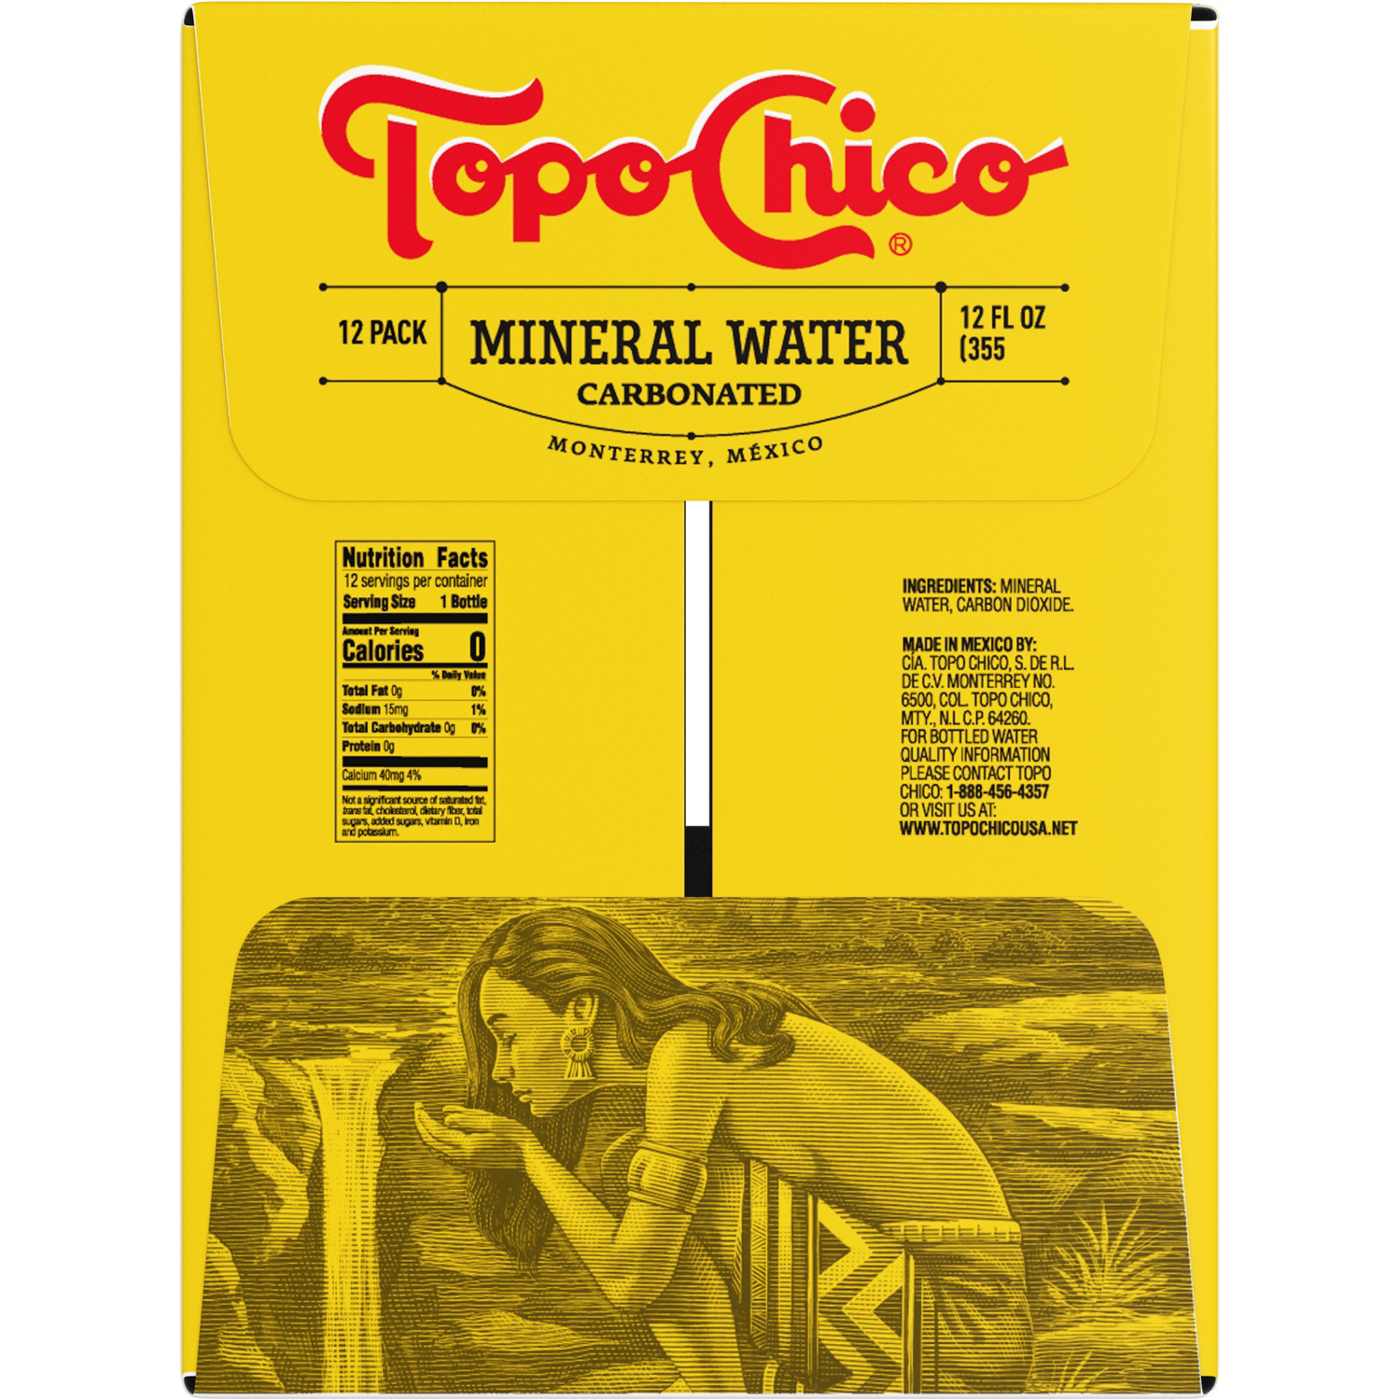 Topo Chico Mineral Water Case 12 oz Bottles; image 2 of 4